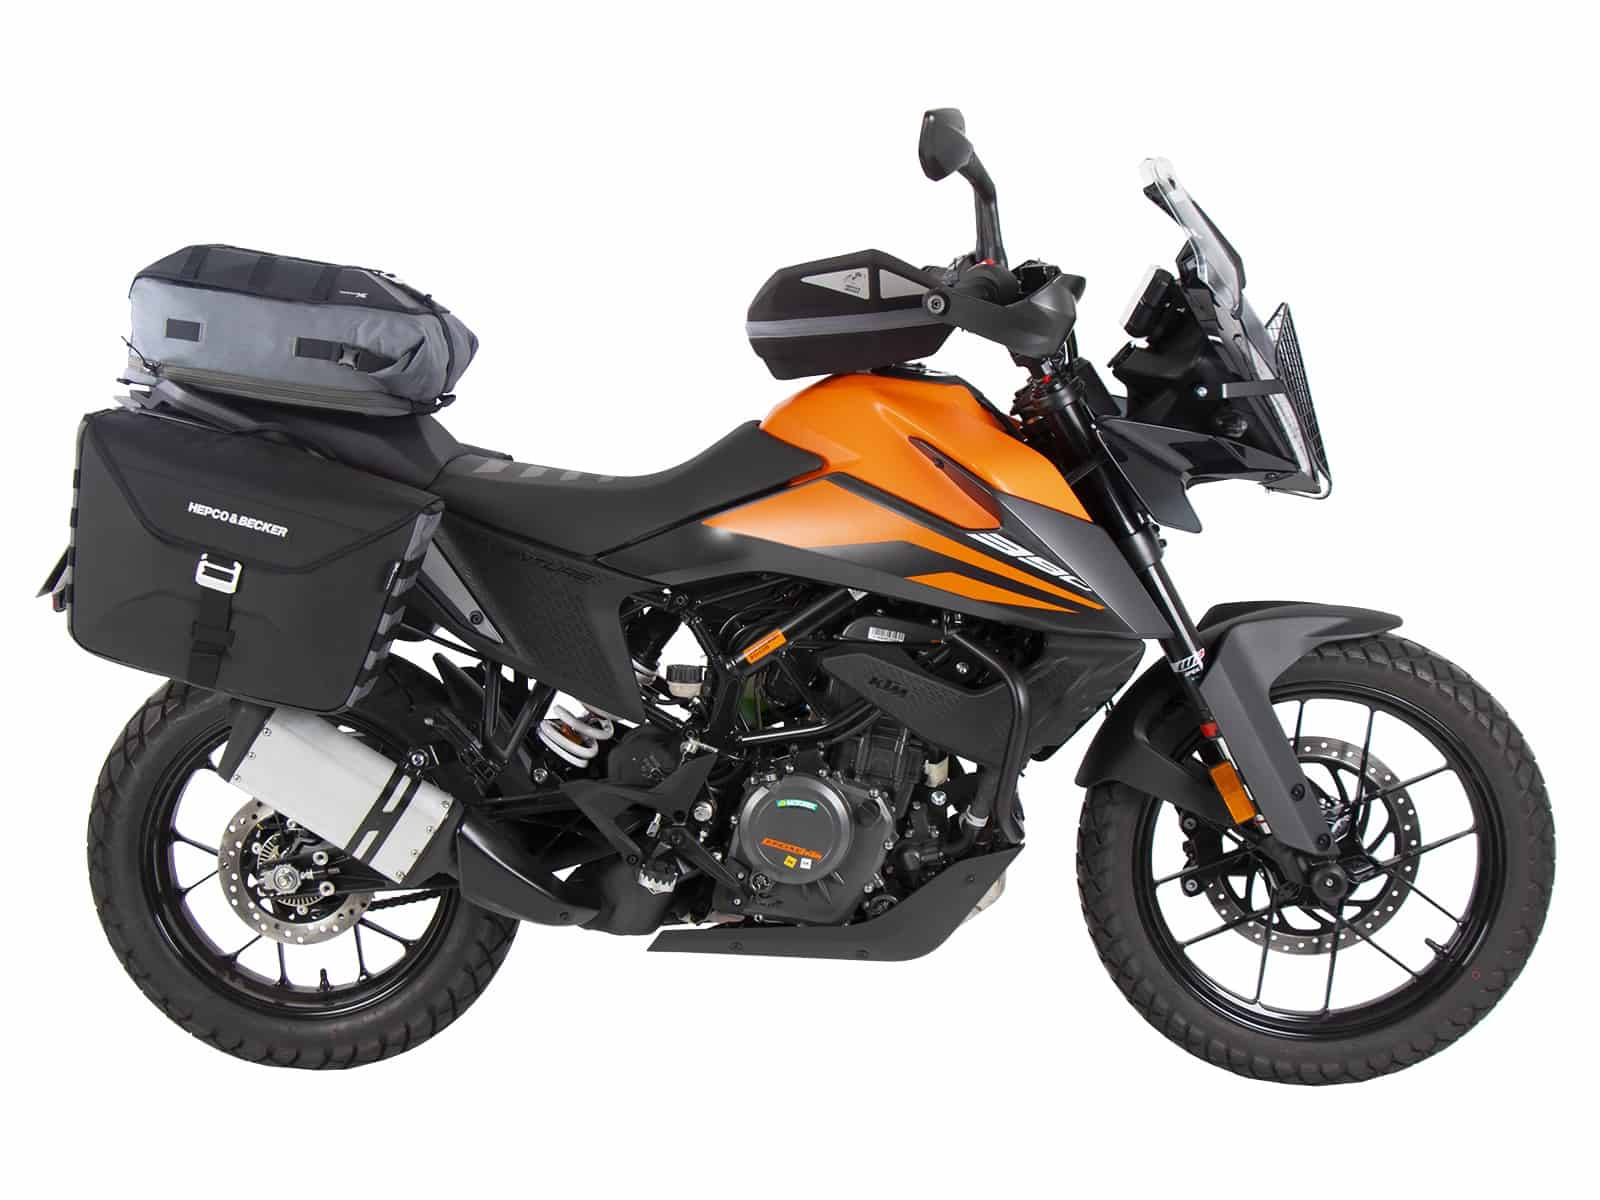 Buy Saddle Stays for KTM Duke accessories Online in India at the best price.